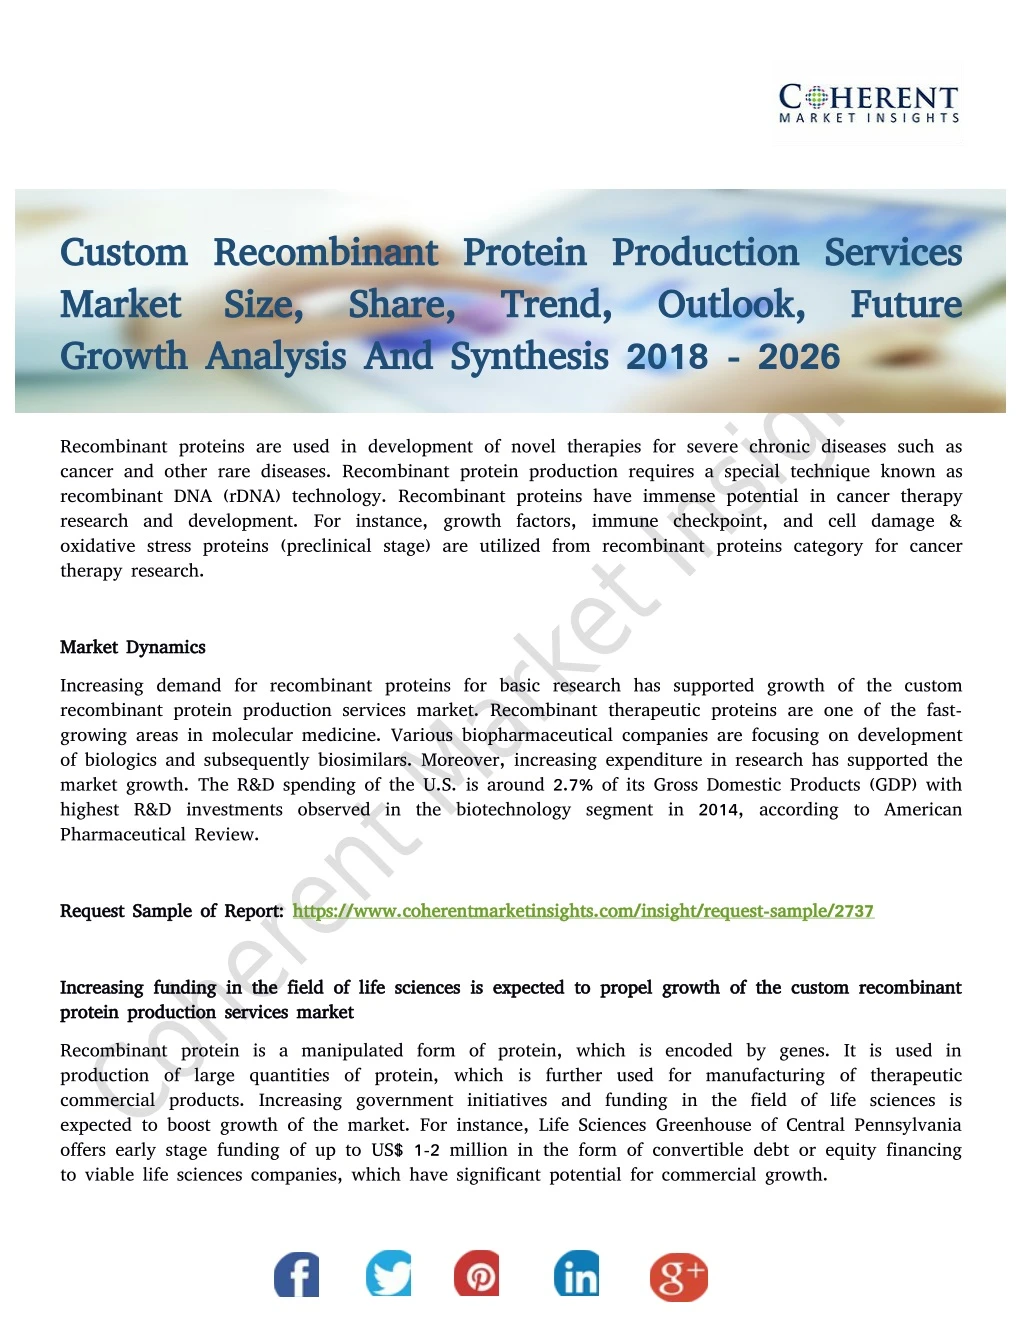 custom recombinant protein production services